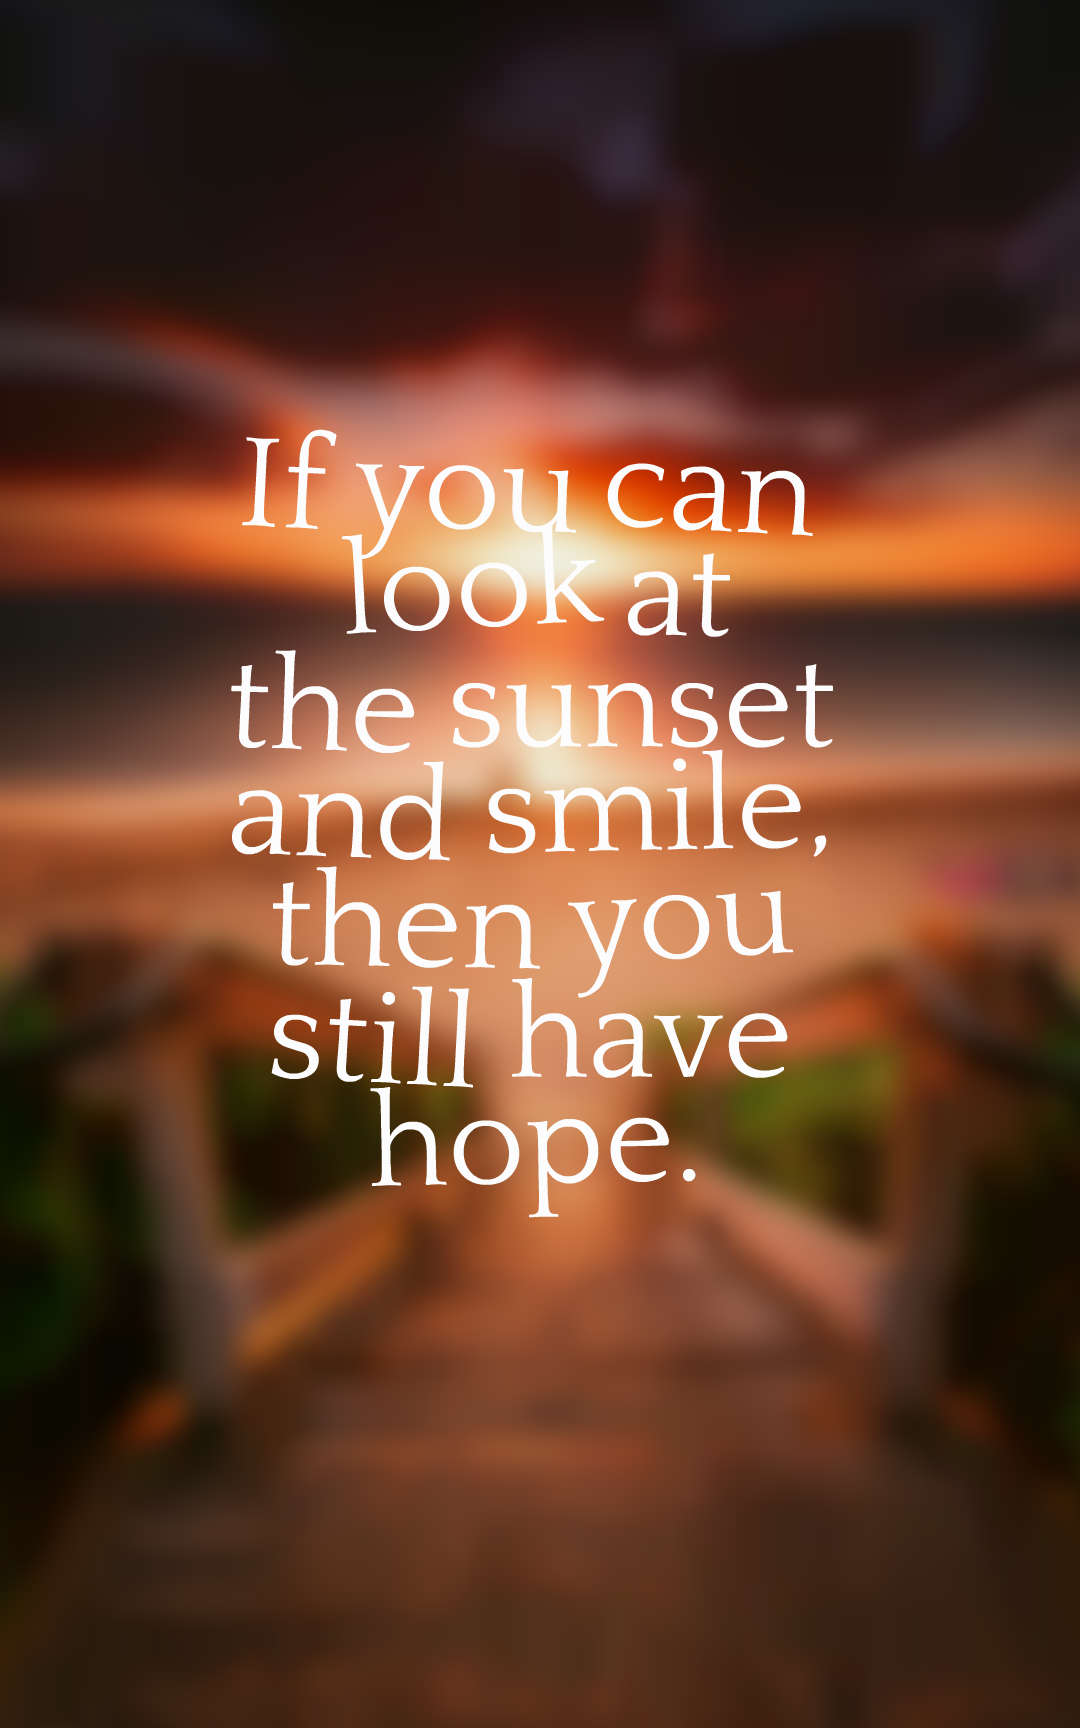 If you can look at the sunset and smile, then you still have hope.